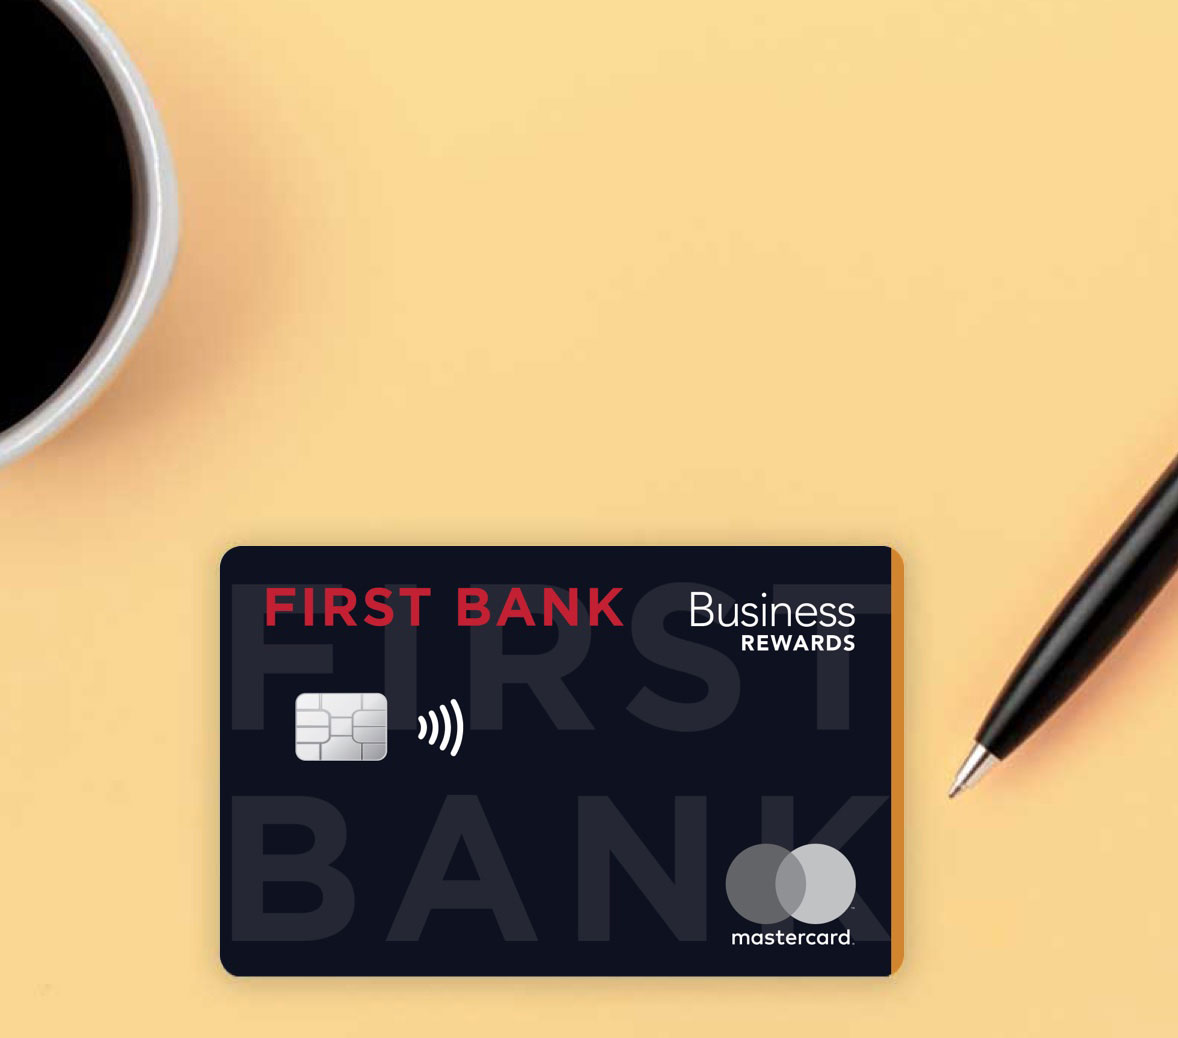 First Bank business credit card on yellow background with pen and coffee cup